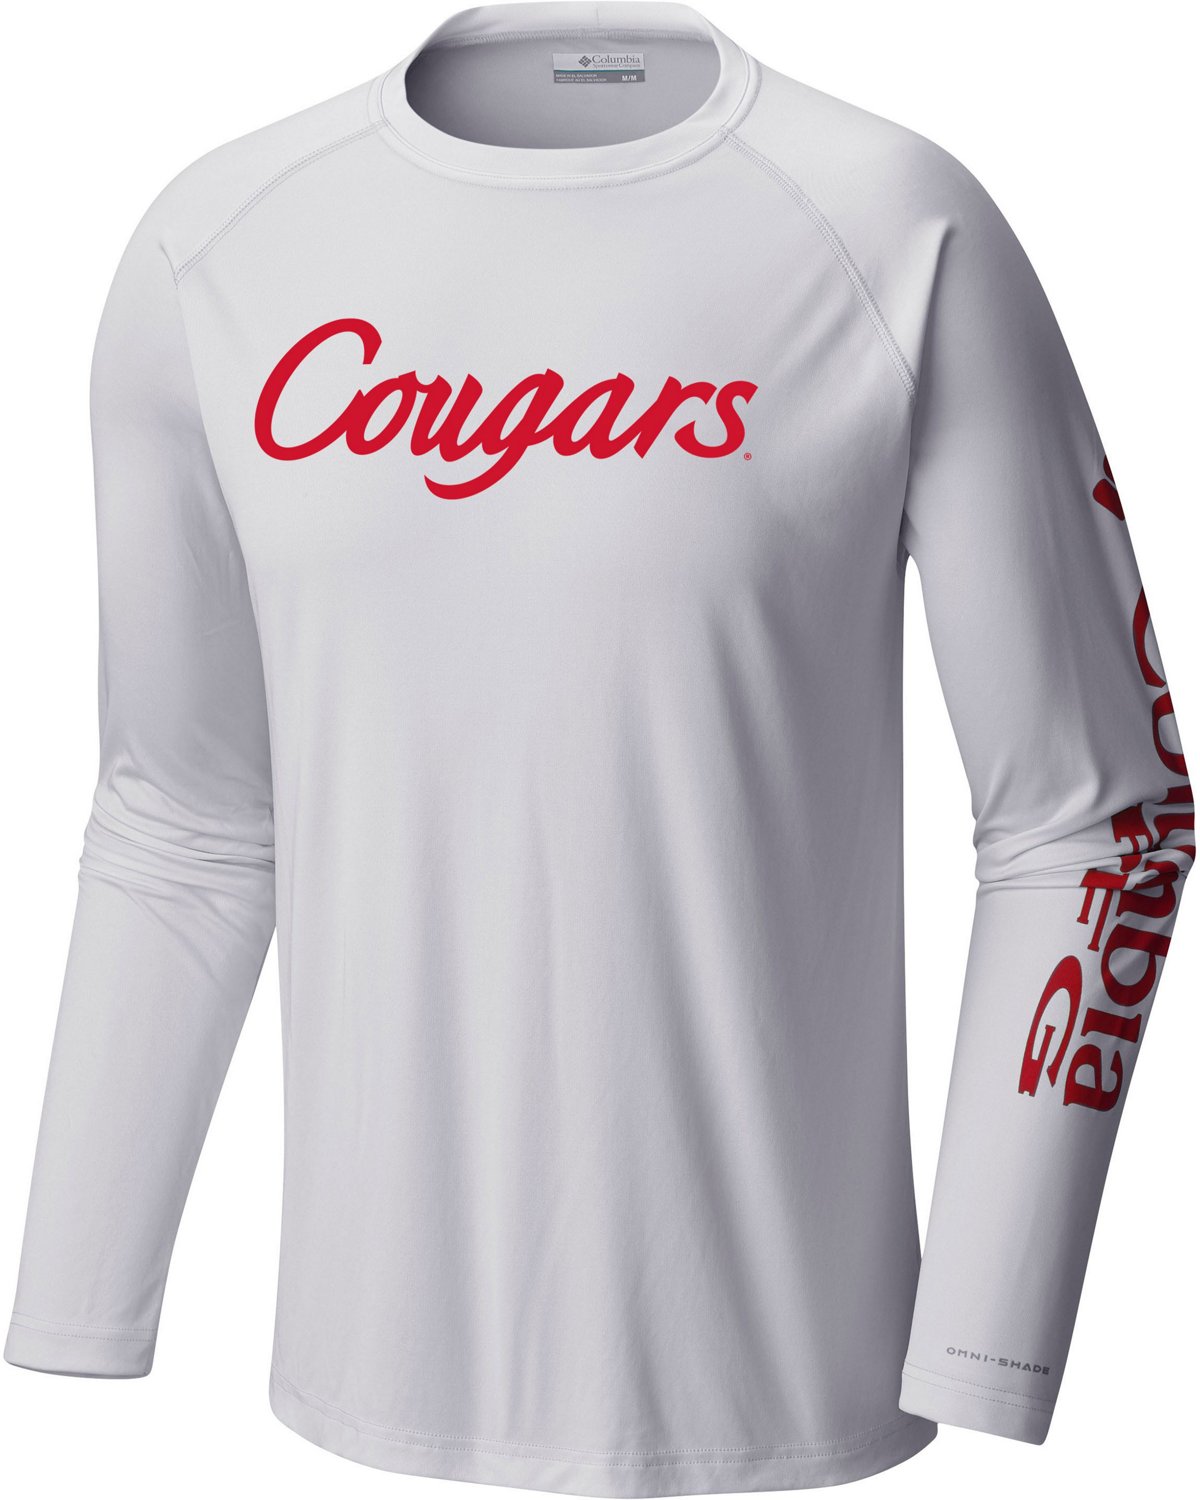 Cougars rowing MVP jersey